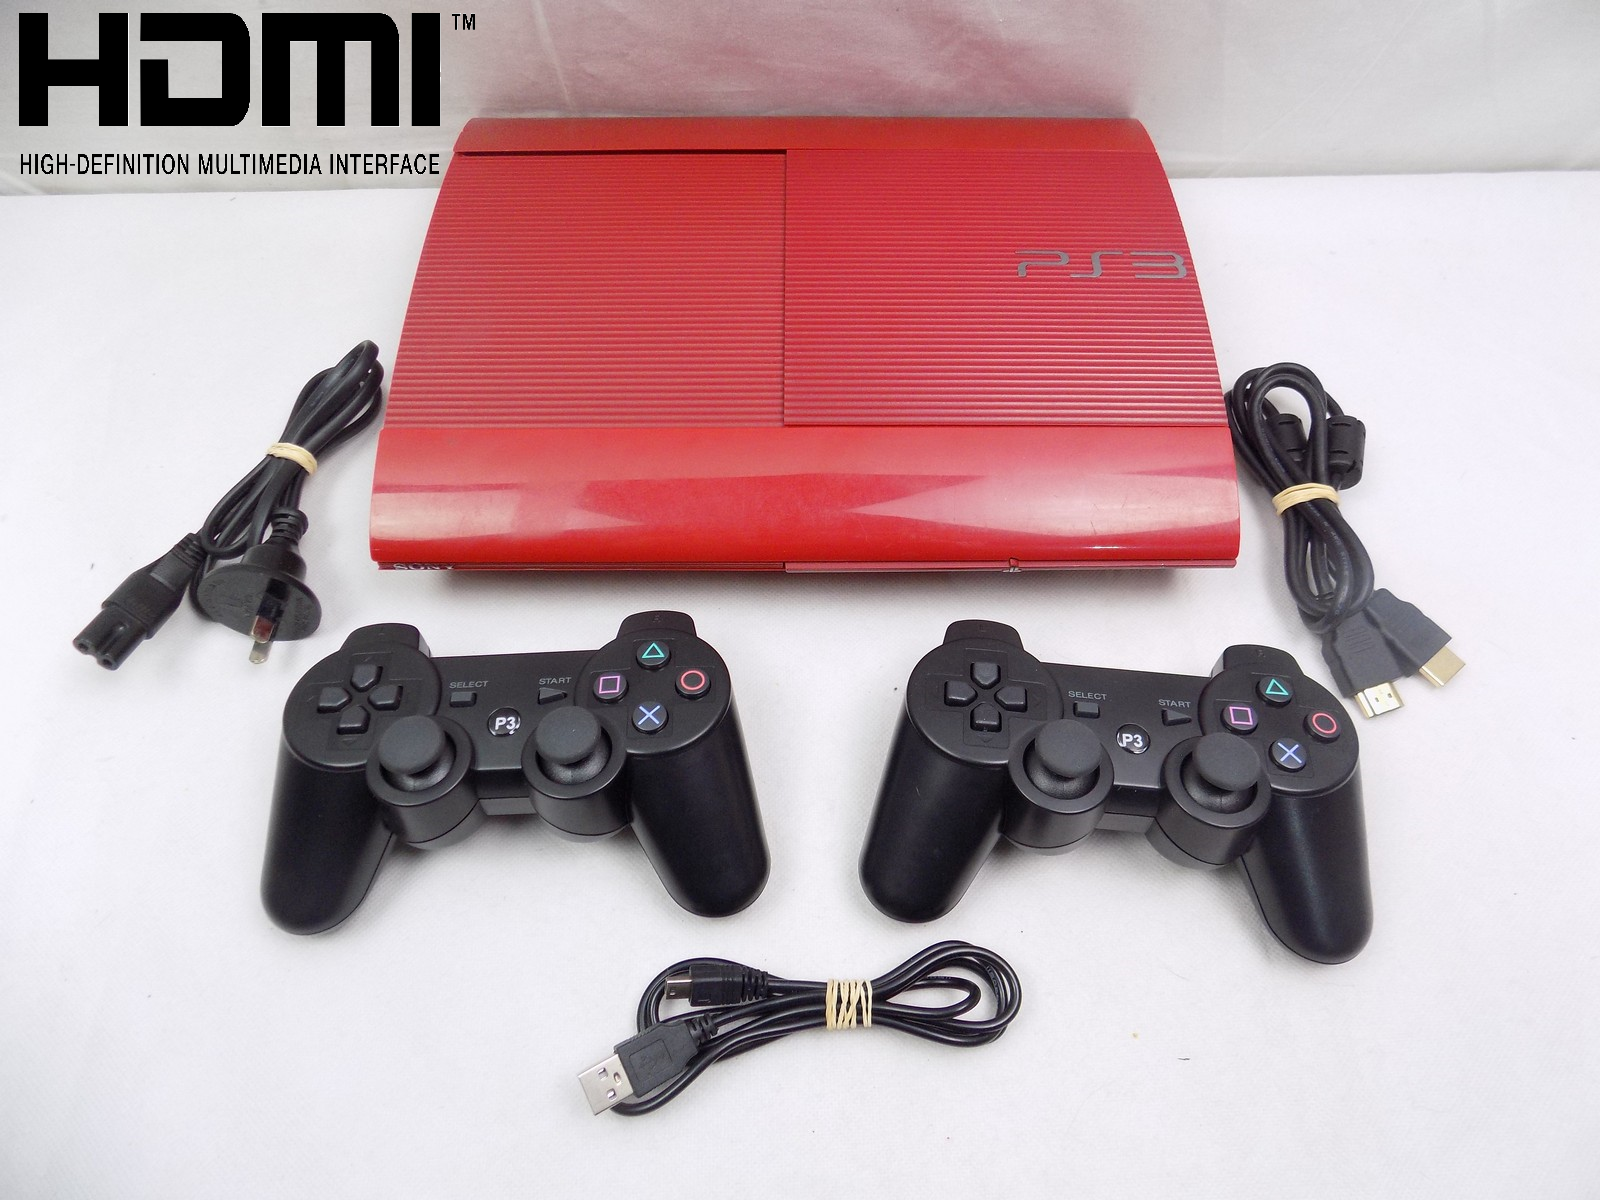 Sony PlayStation 3 Console Red 500GB